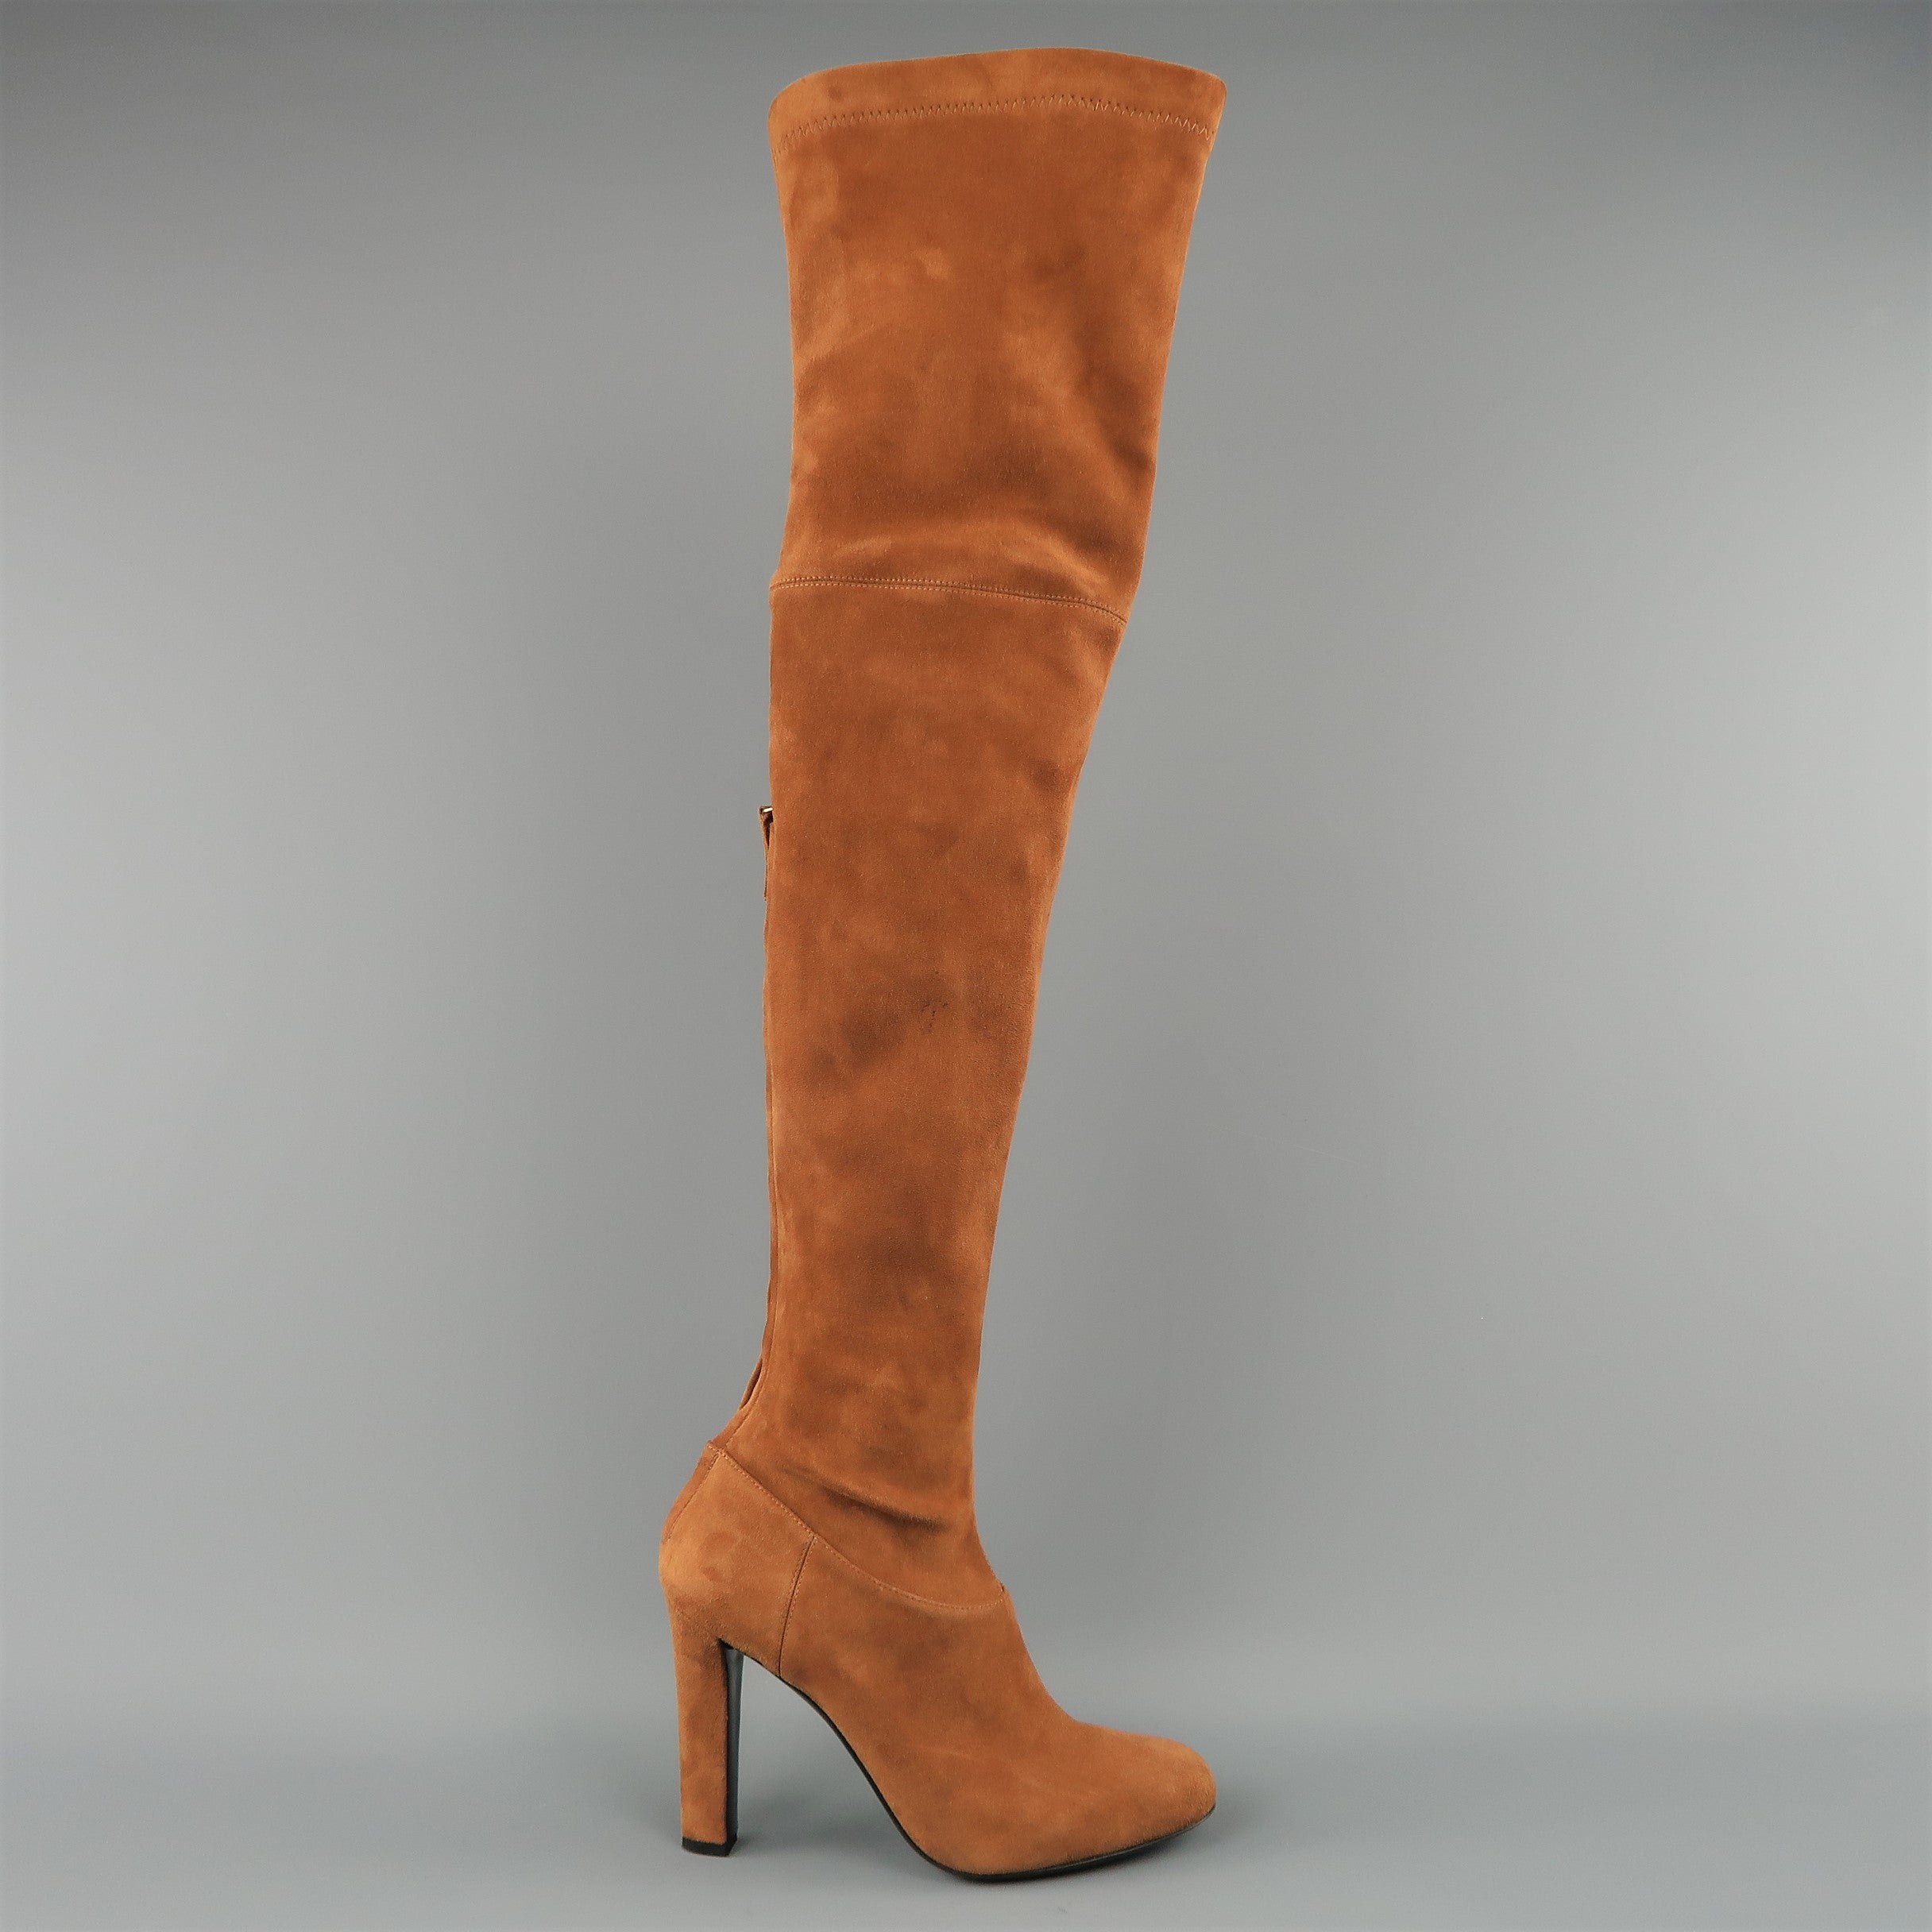 tan suede thigh high boots